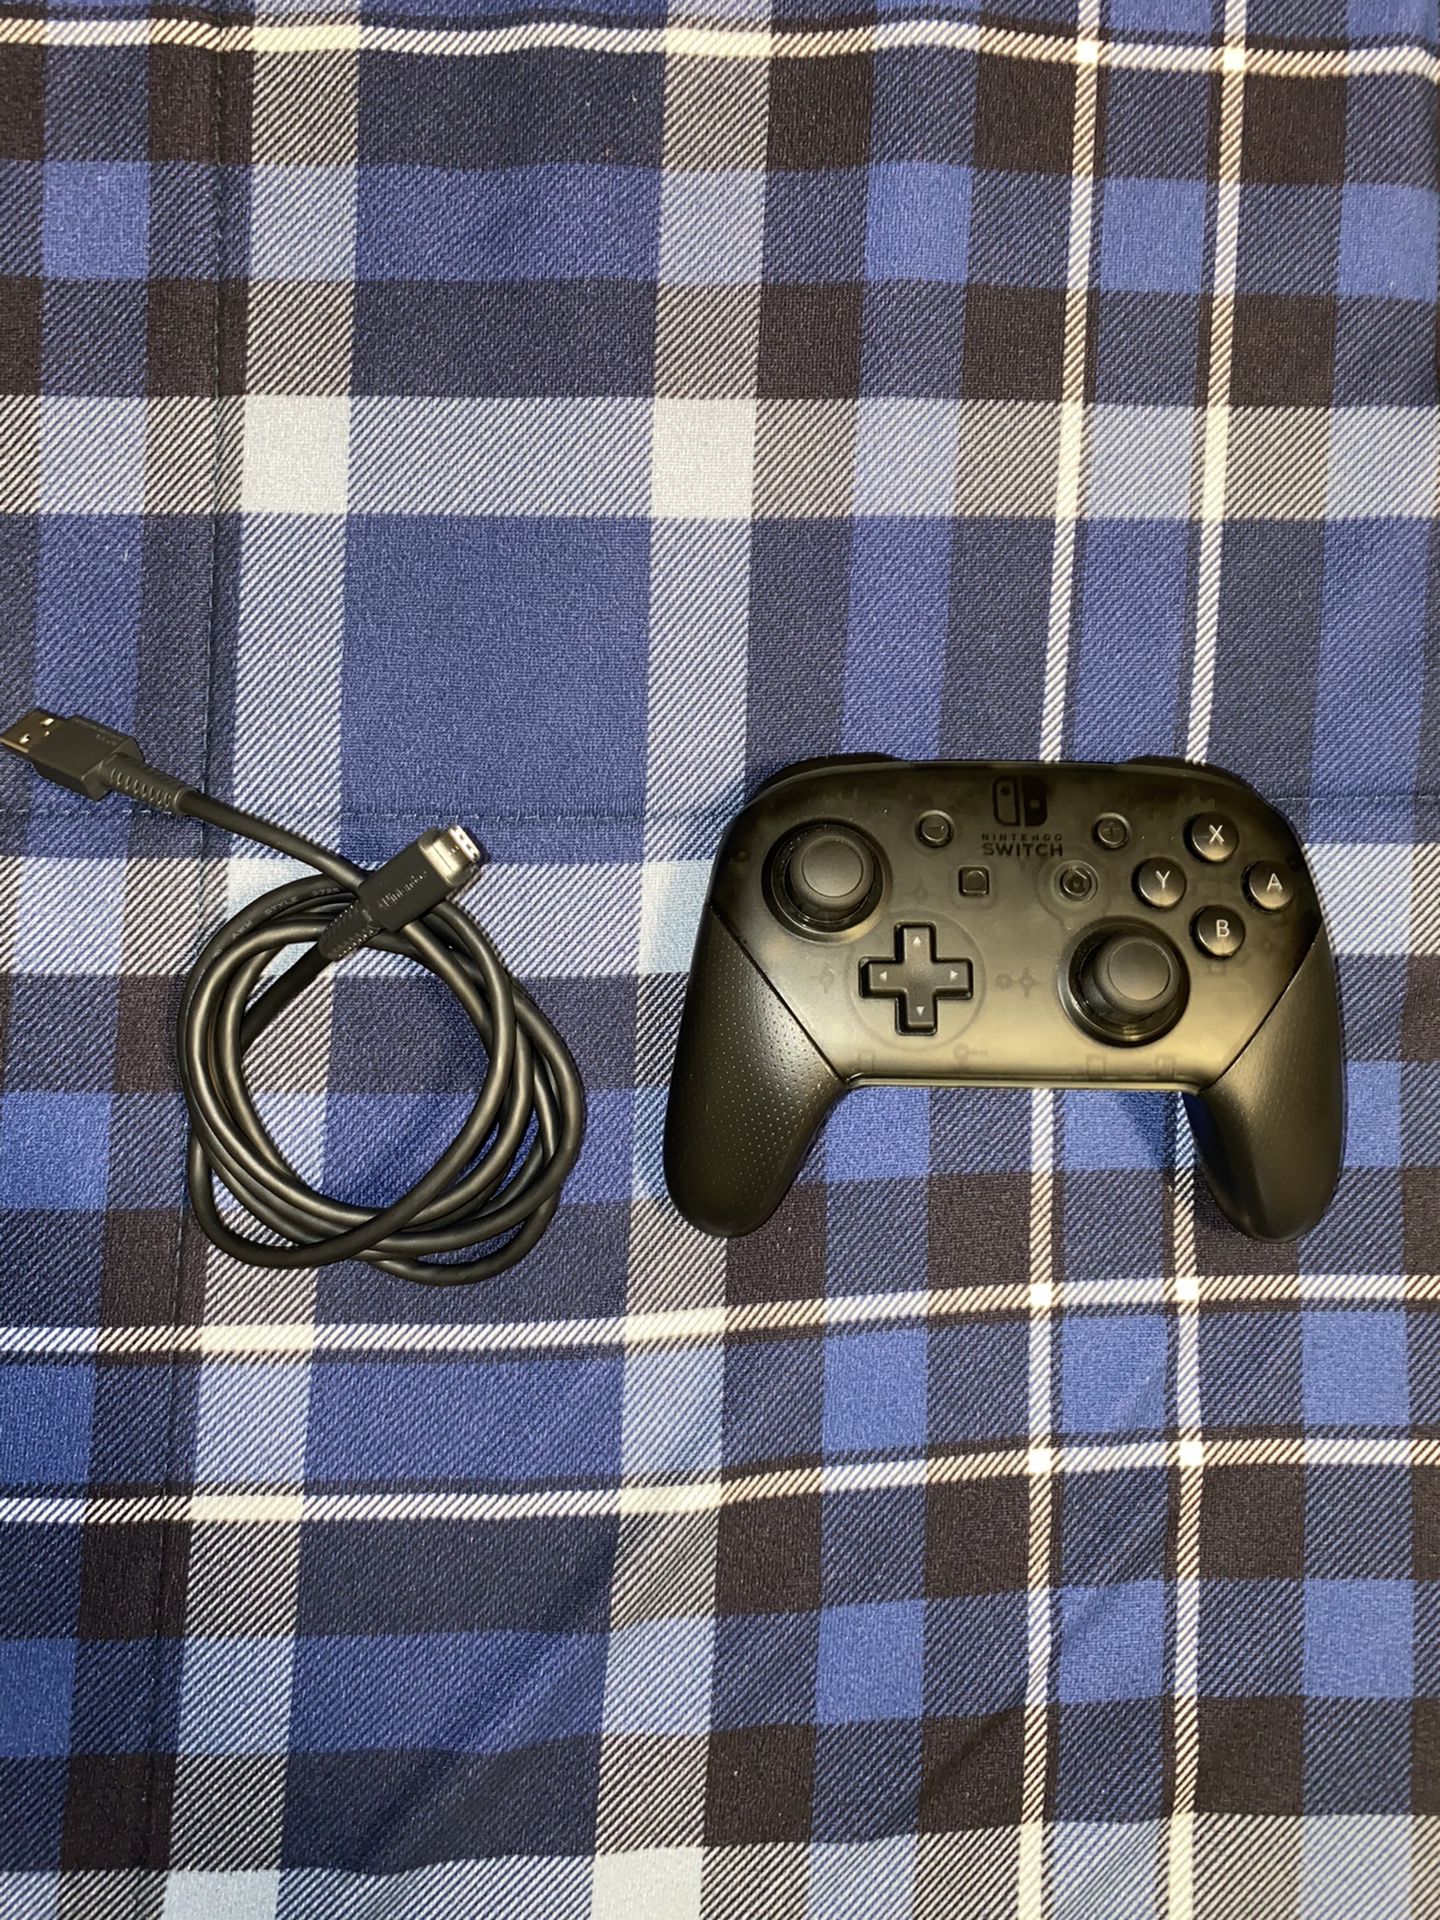 Nintendo Switch Pro controller with charger (Irving Texas)